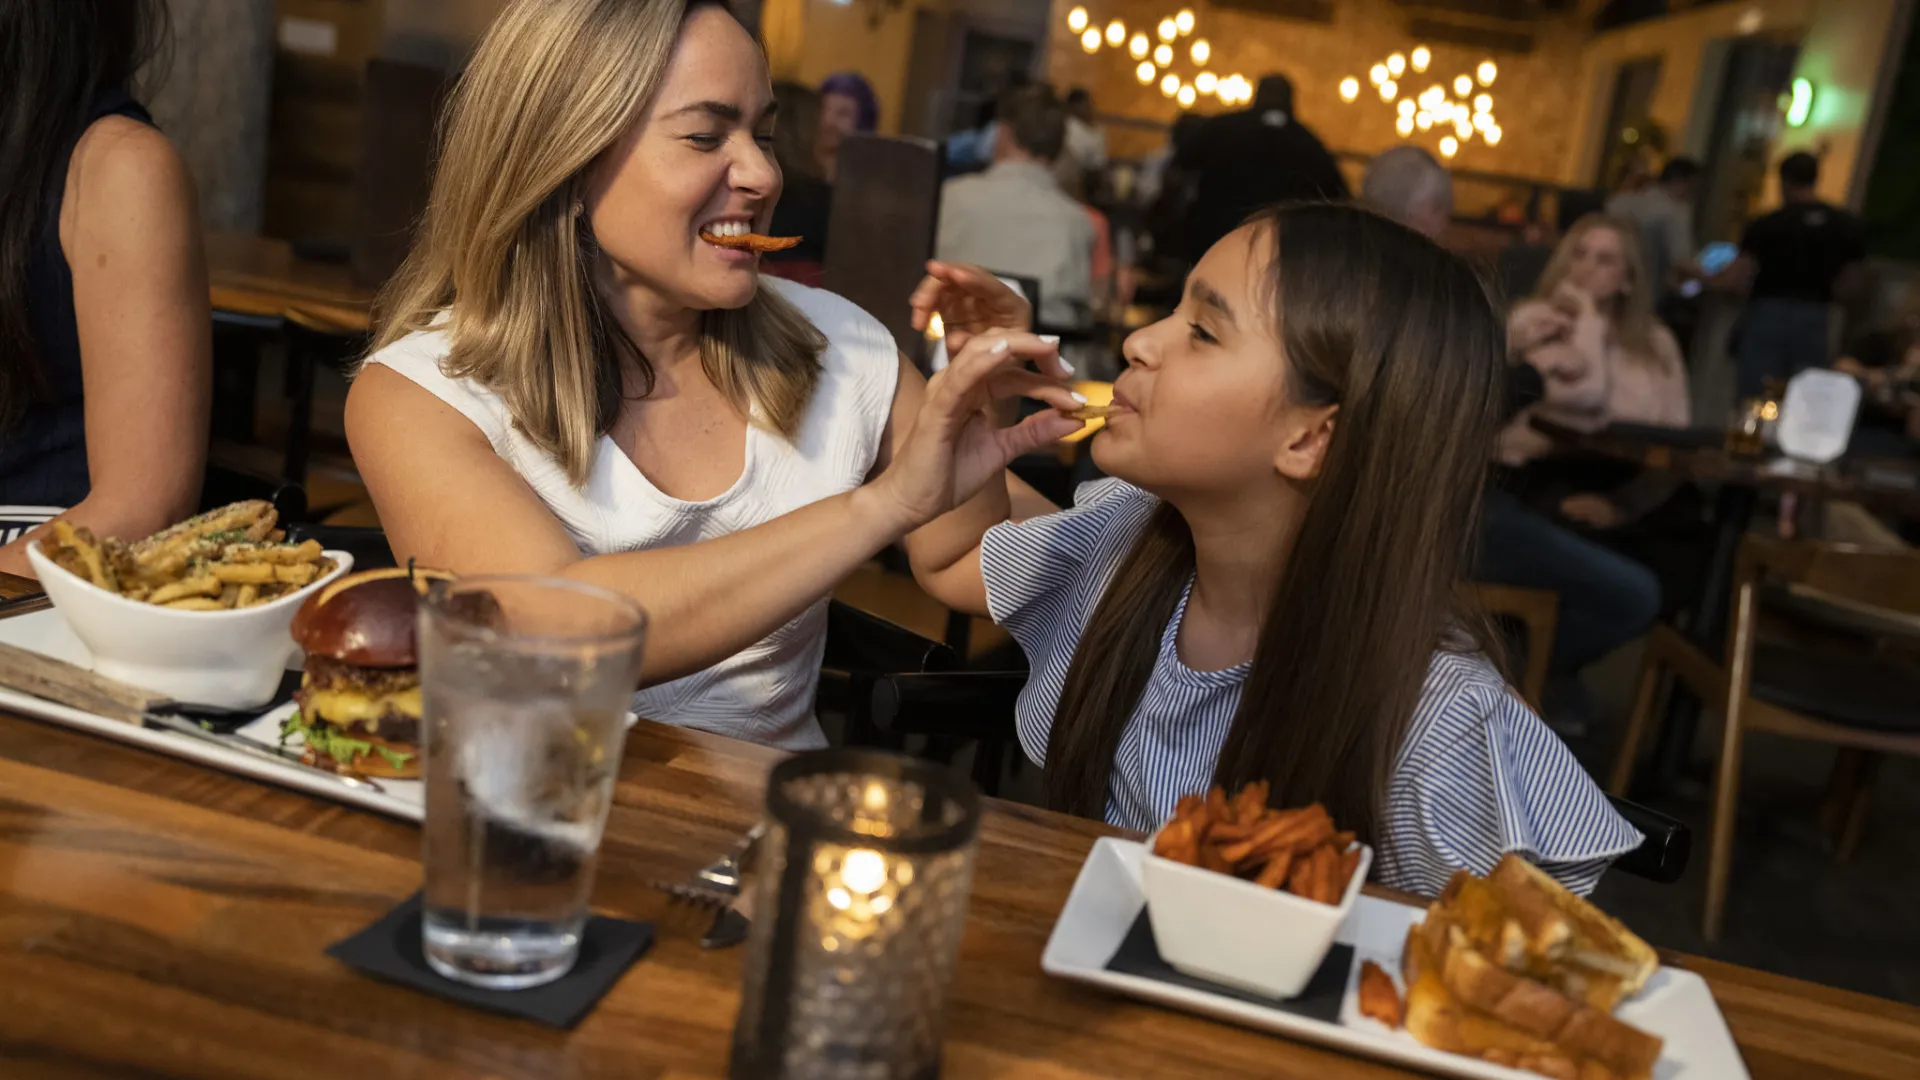 Mother and Daughter playfully feeding each other at dinner